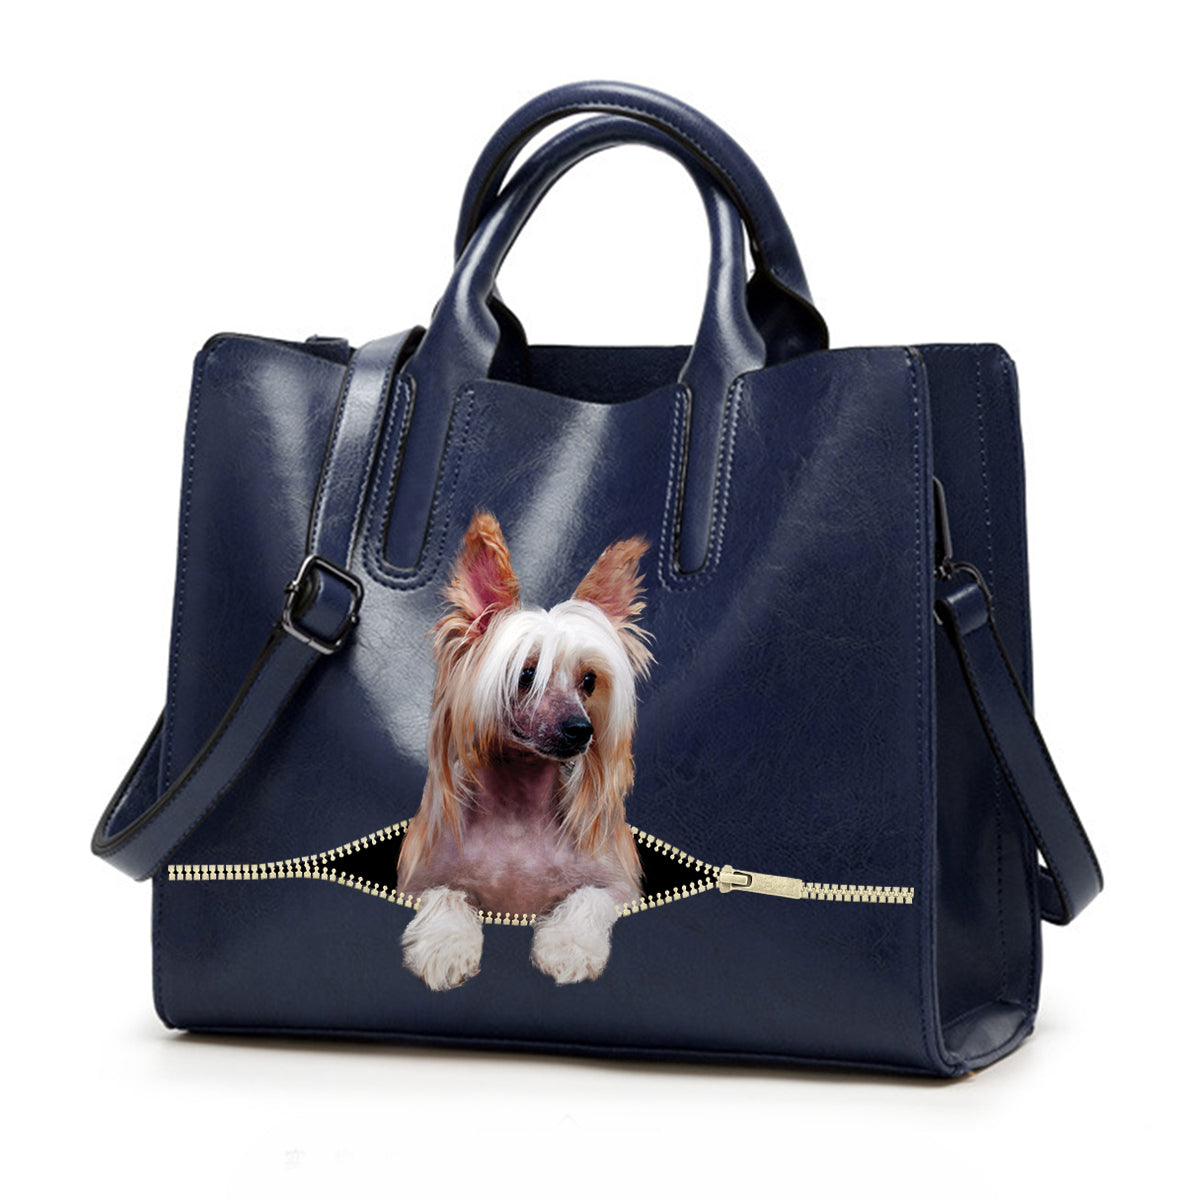 Reduce Stress At Work With Chinese Crested - Luxury Handbag V1